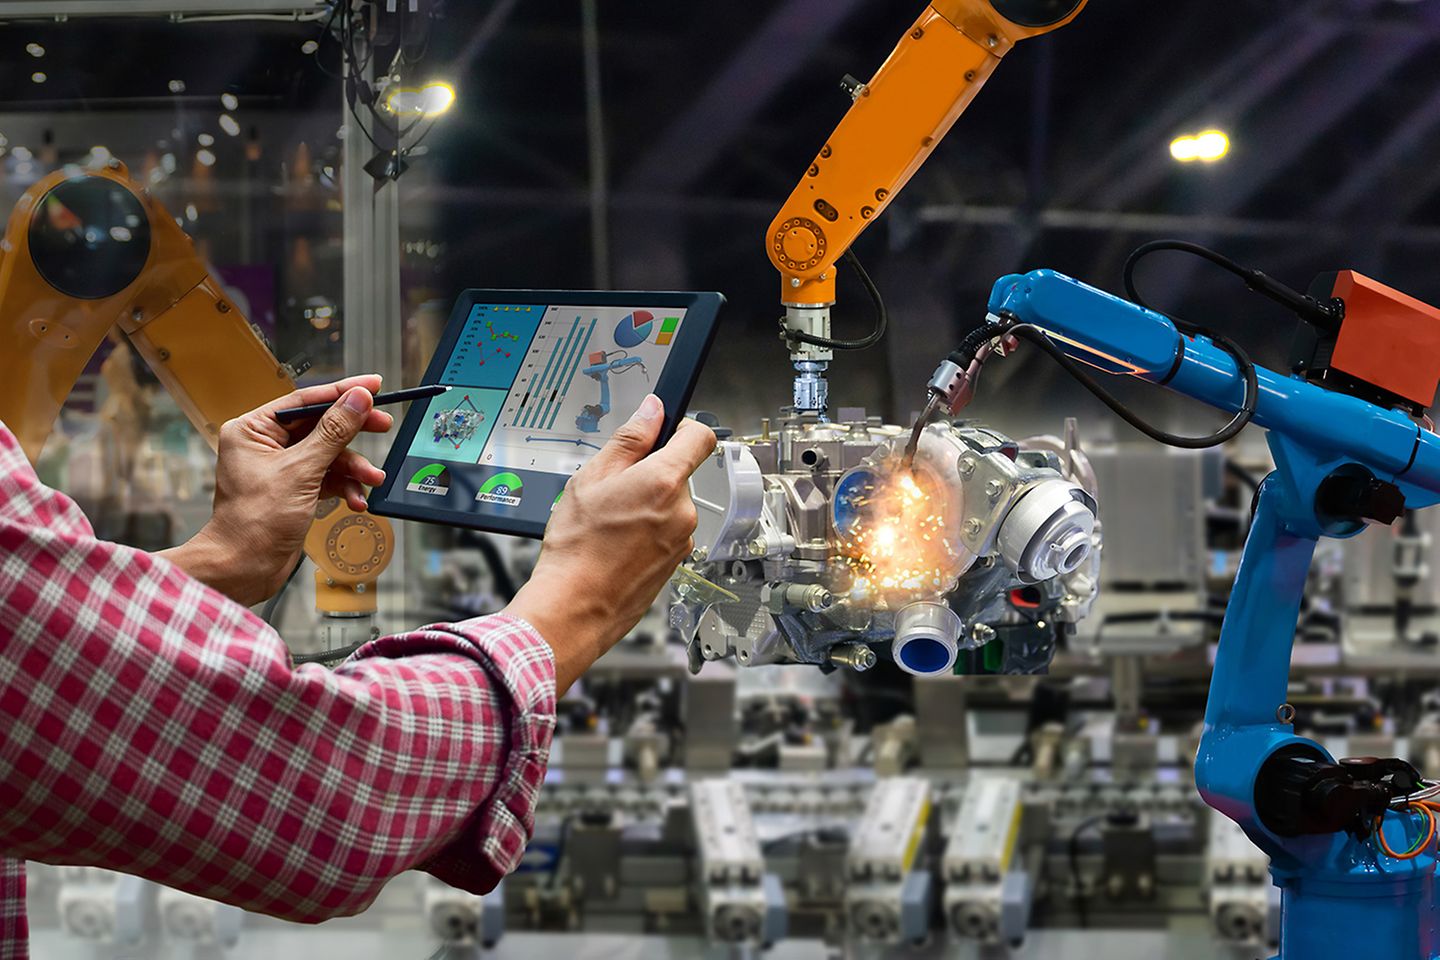 Engineer tapping a touch screen; in the background, mechanical arms manufacturing an engine